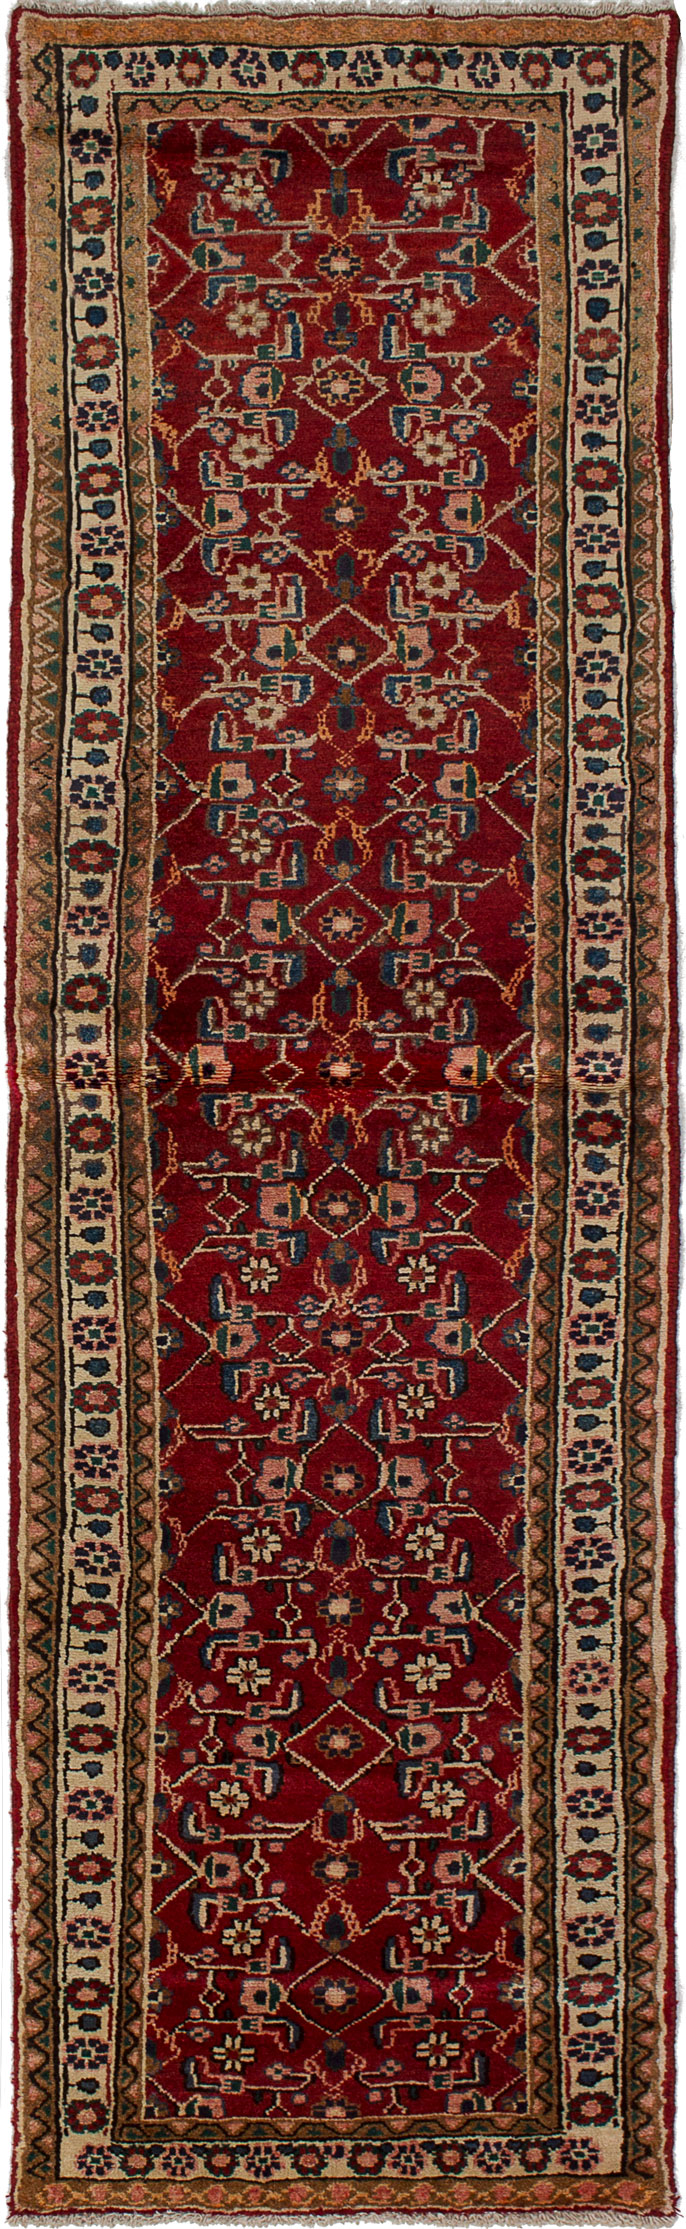 Hand-knotted Hamadan Red Wool Rug 2'5" x 8'5" Size: 2'5" x 8'5"  